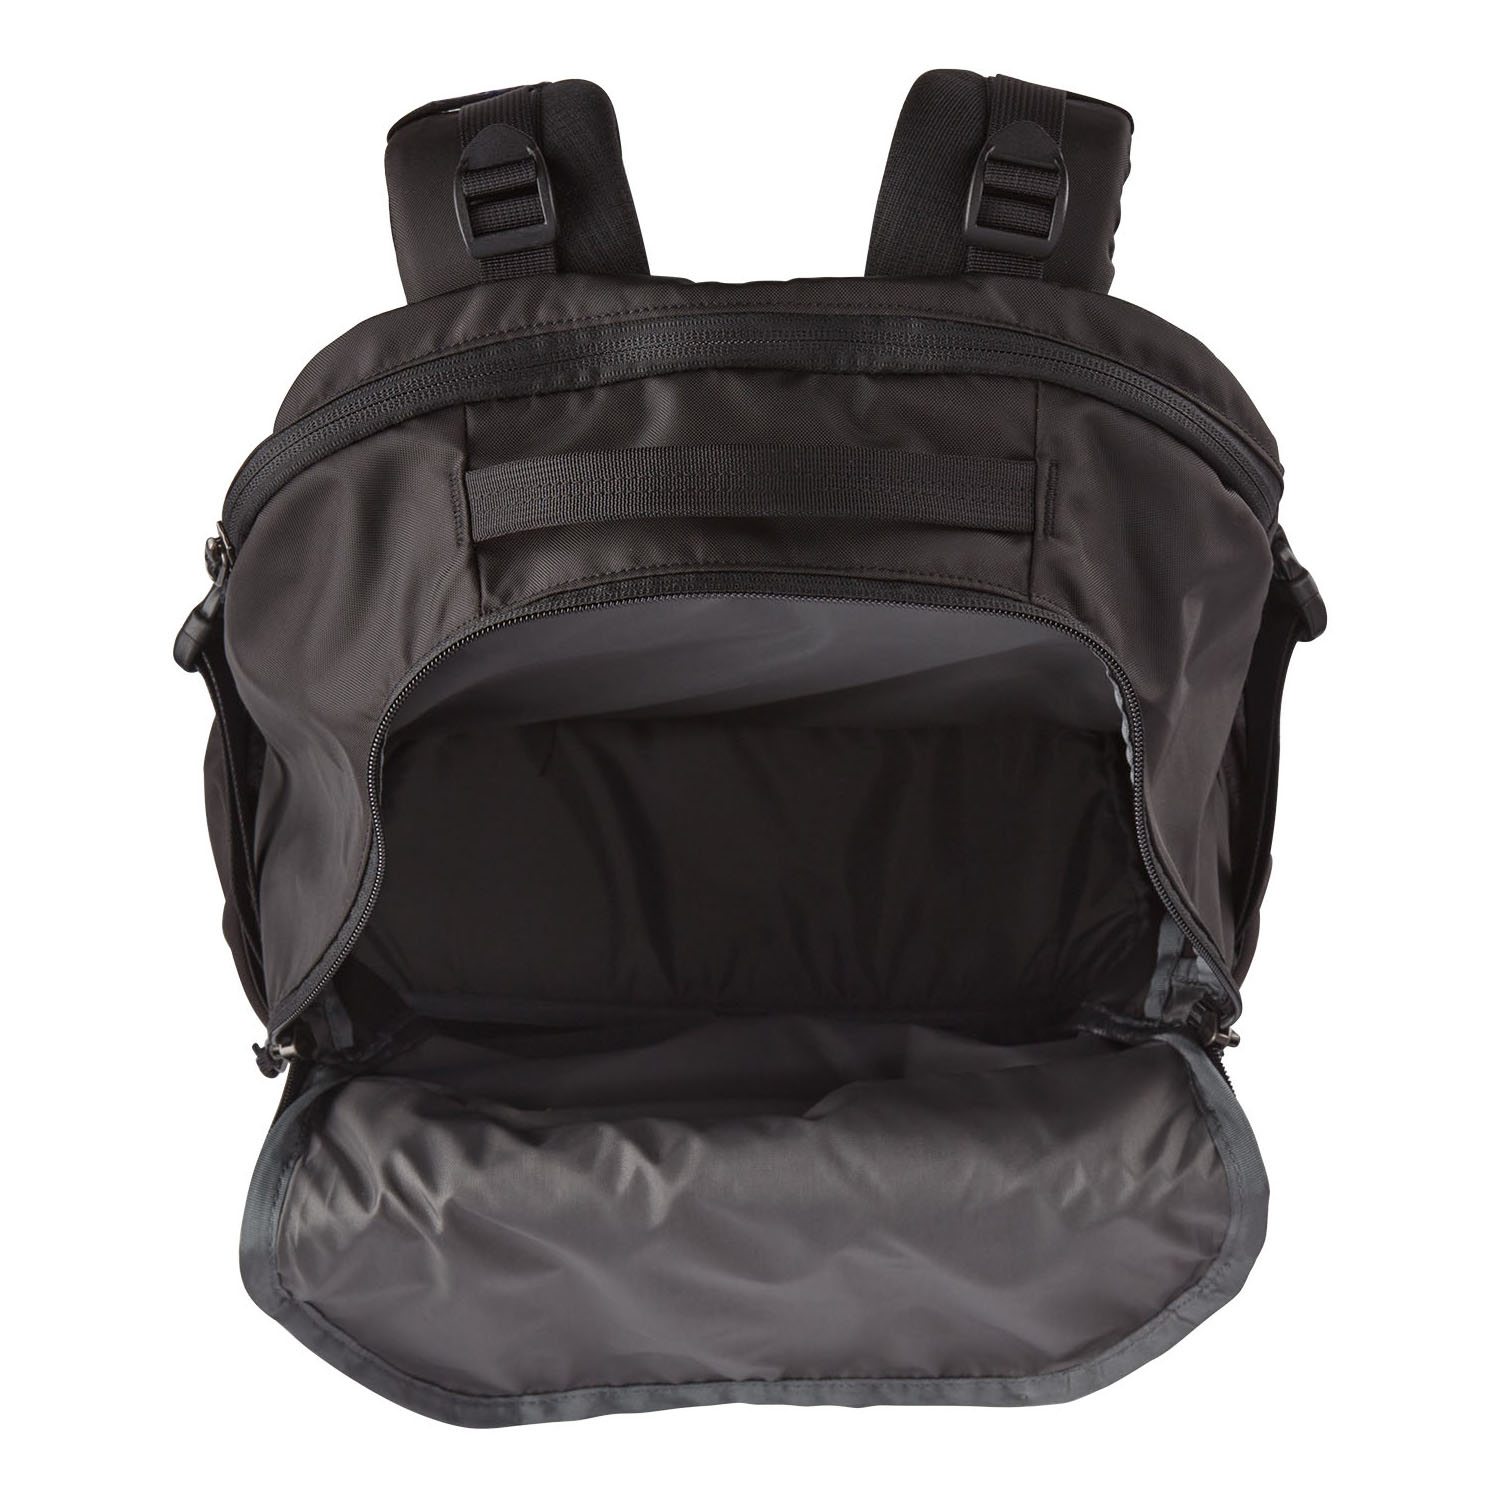 Patagonia Refugio Everyday Carry Backpack - 30L - Black 